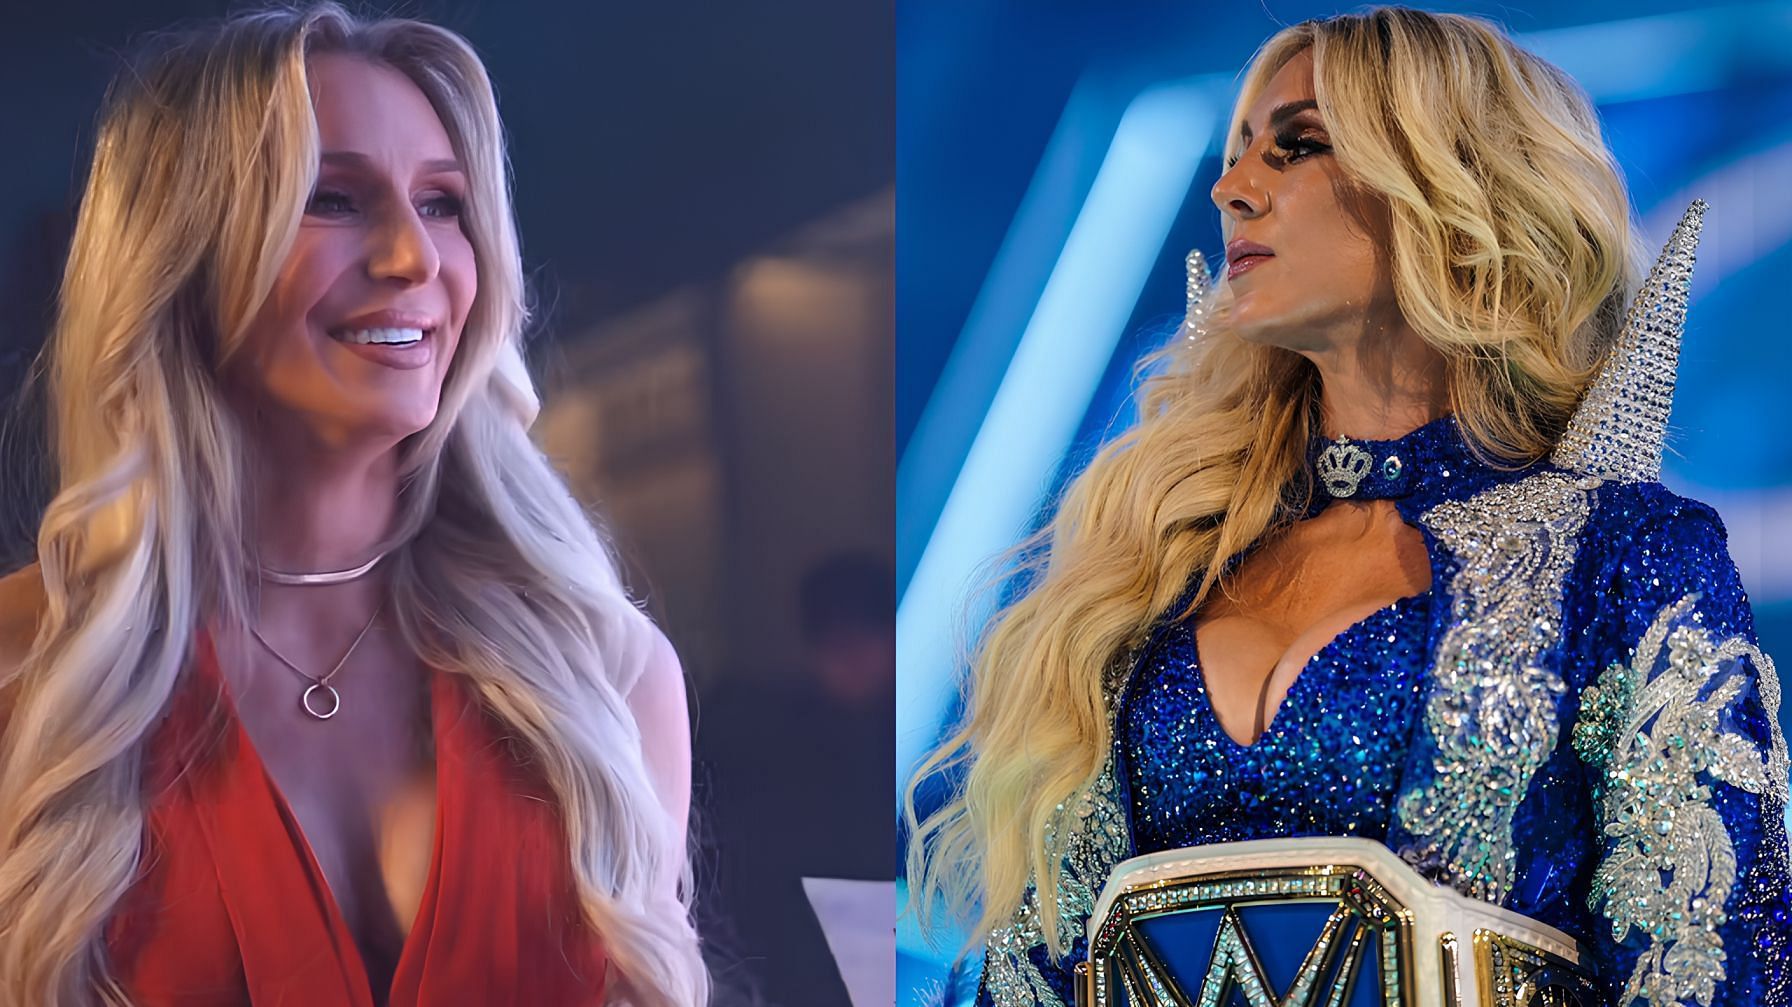 Charlotte Flair is currently on a hiatus from WWE